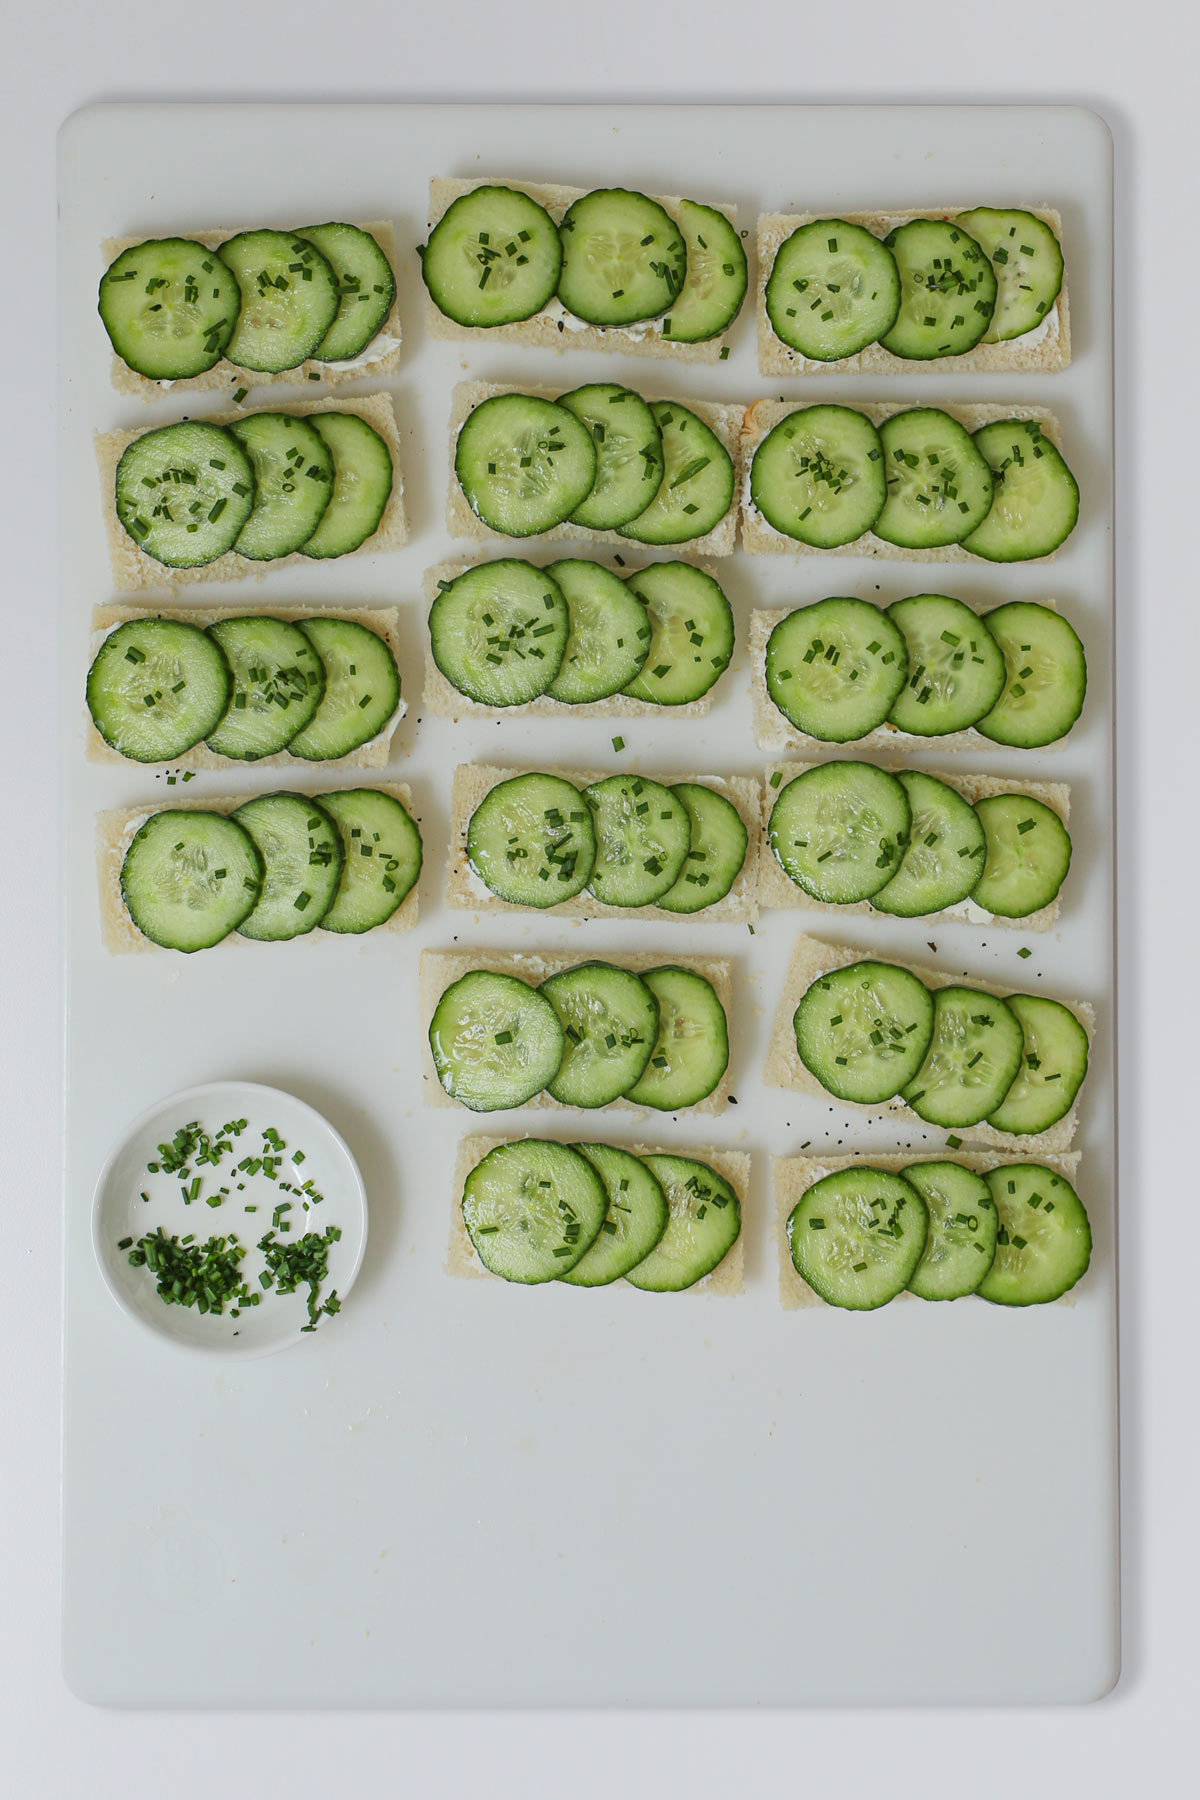 cucumber slices laid on bread strips and topped with chives.